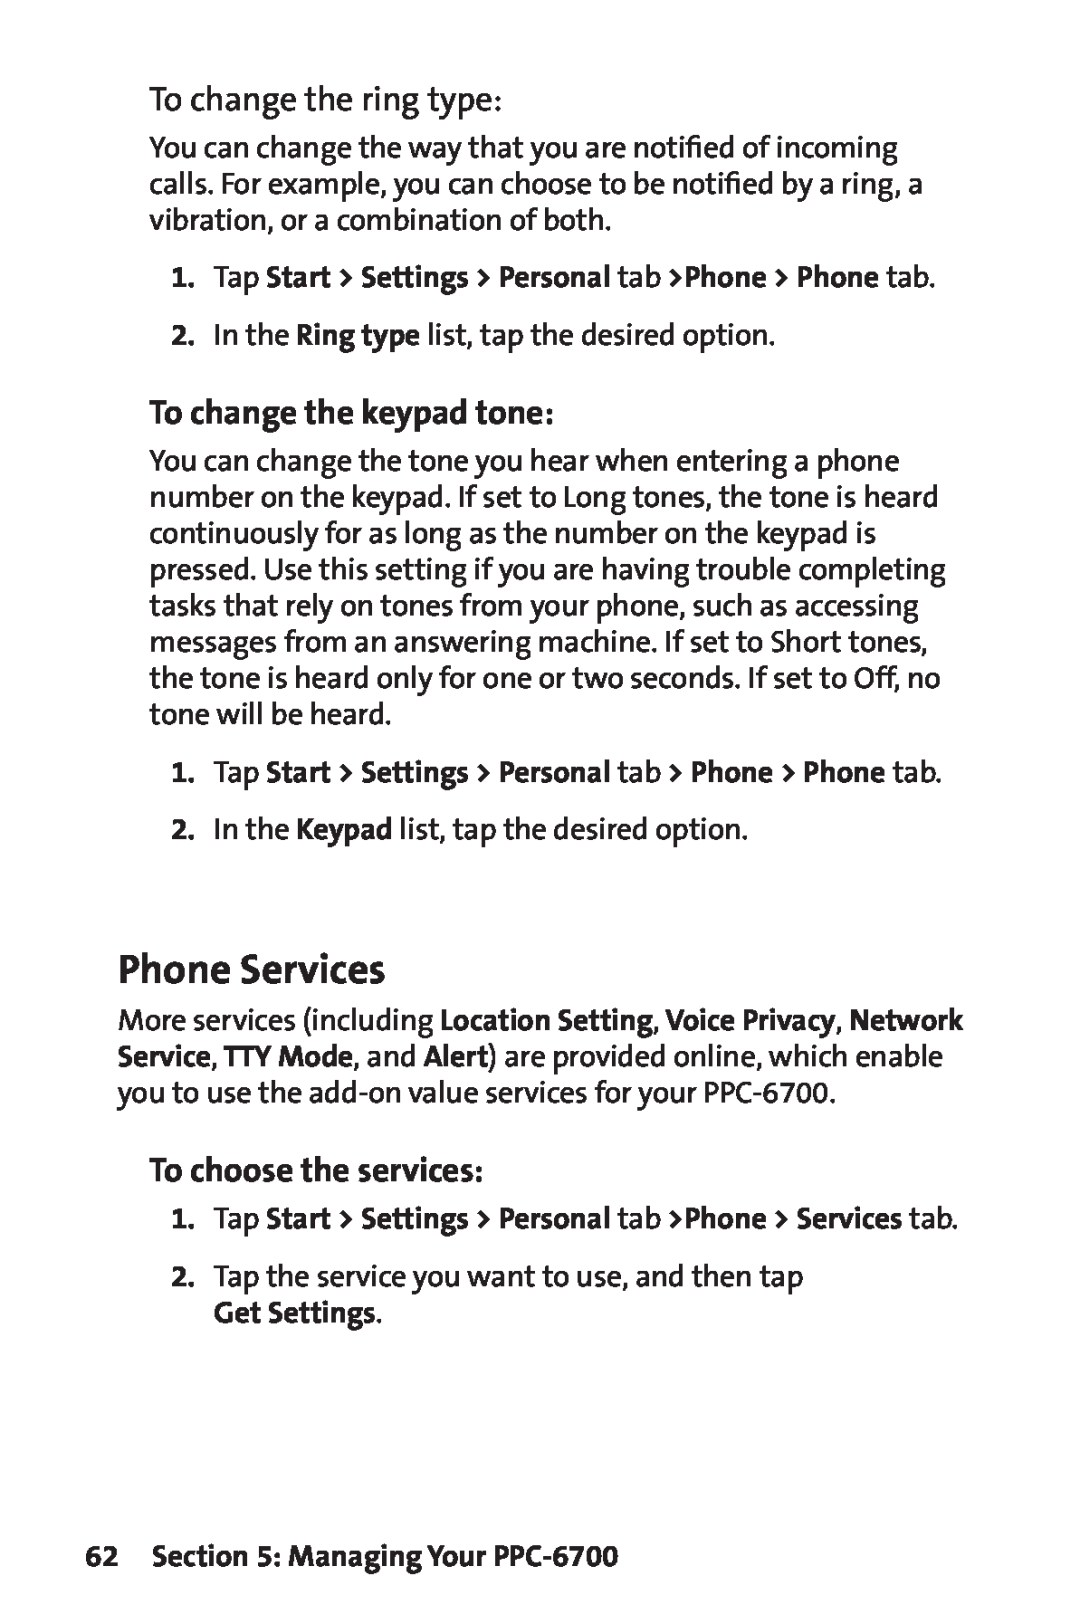 Sprint Nextel PPC-6700 manual Phone Services, To change the ring type, To change the keypad tone, To choose the services 